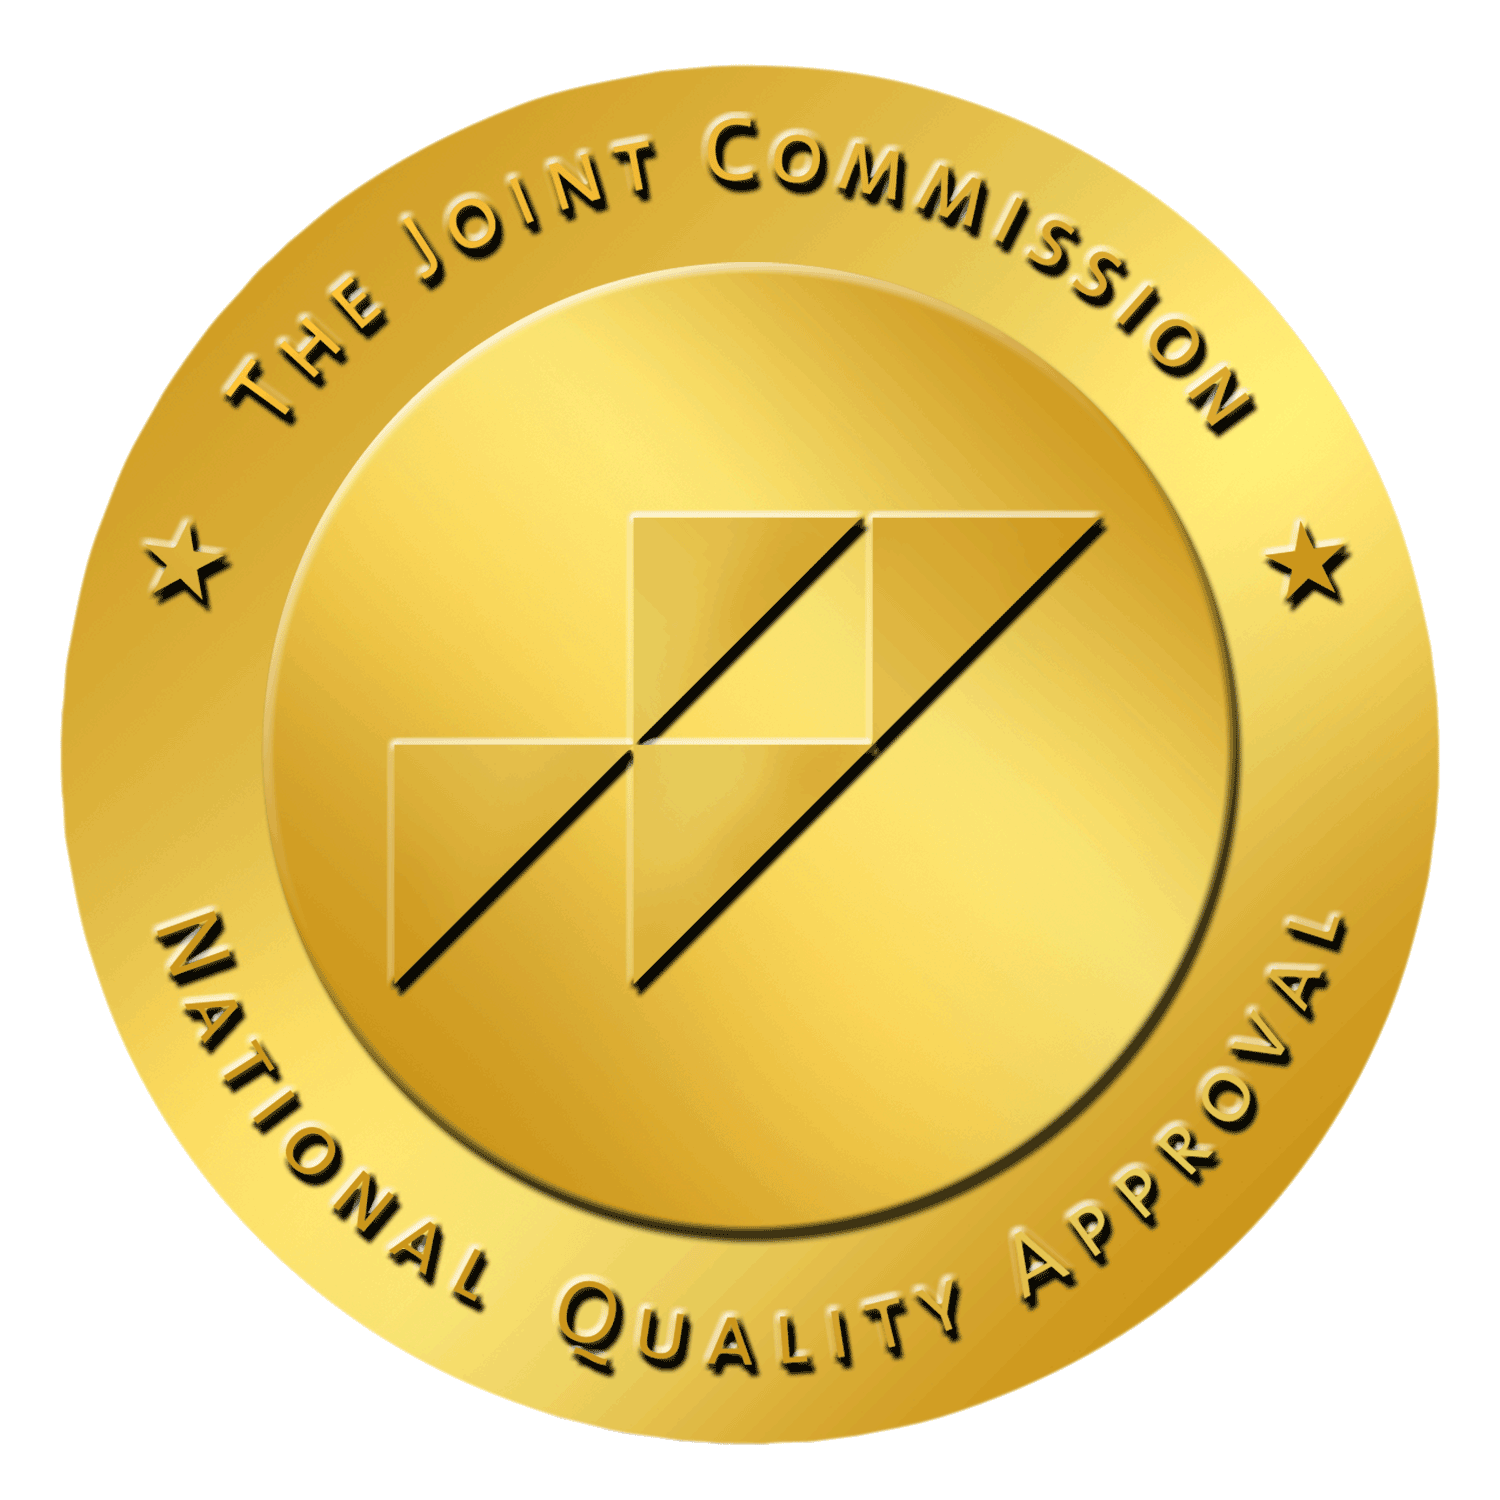 Gold Seal Badge - A badge signifying participation in The Joint Commission National Quality Approval program.